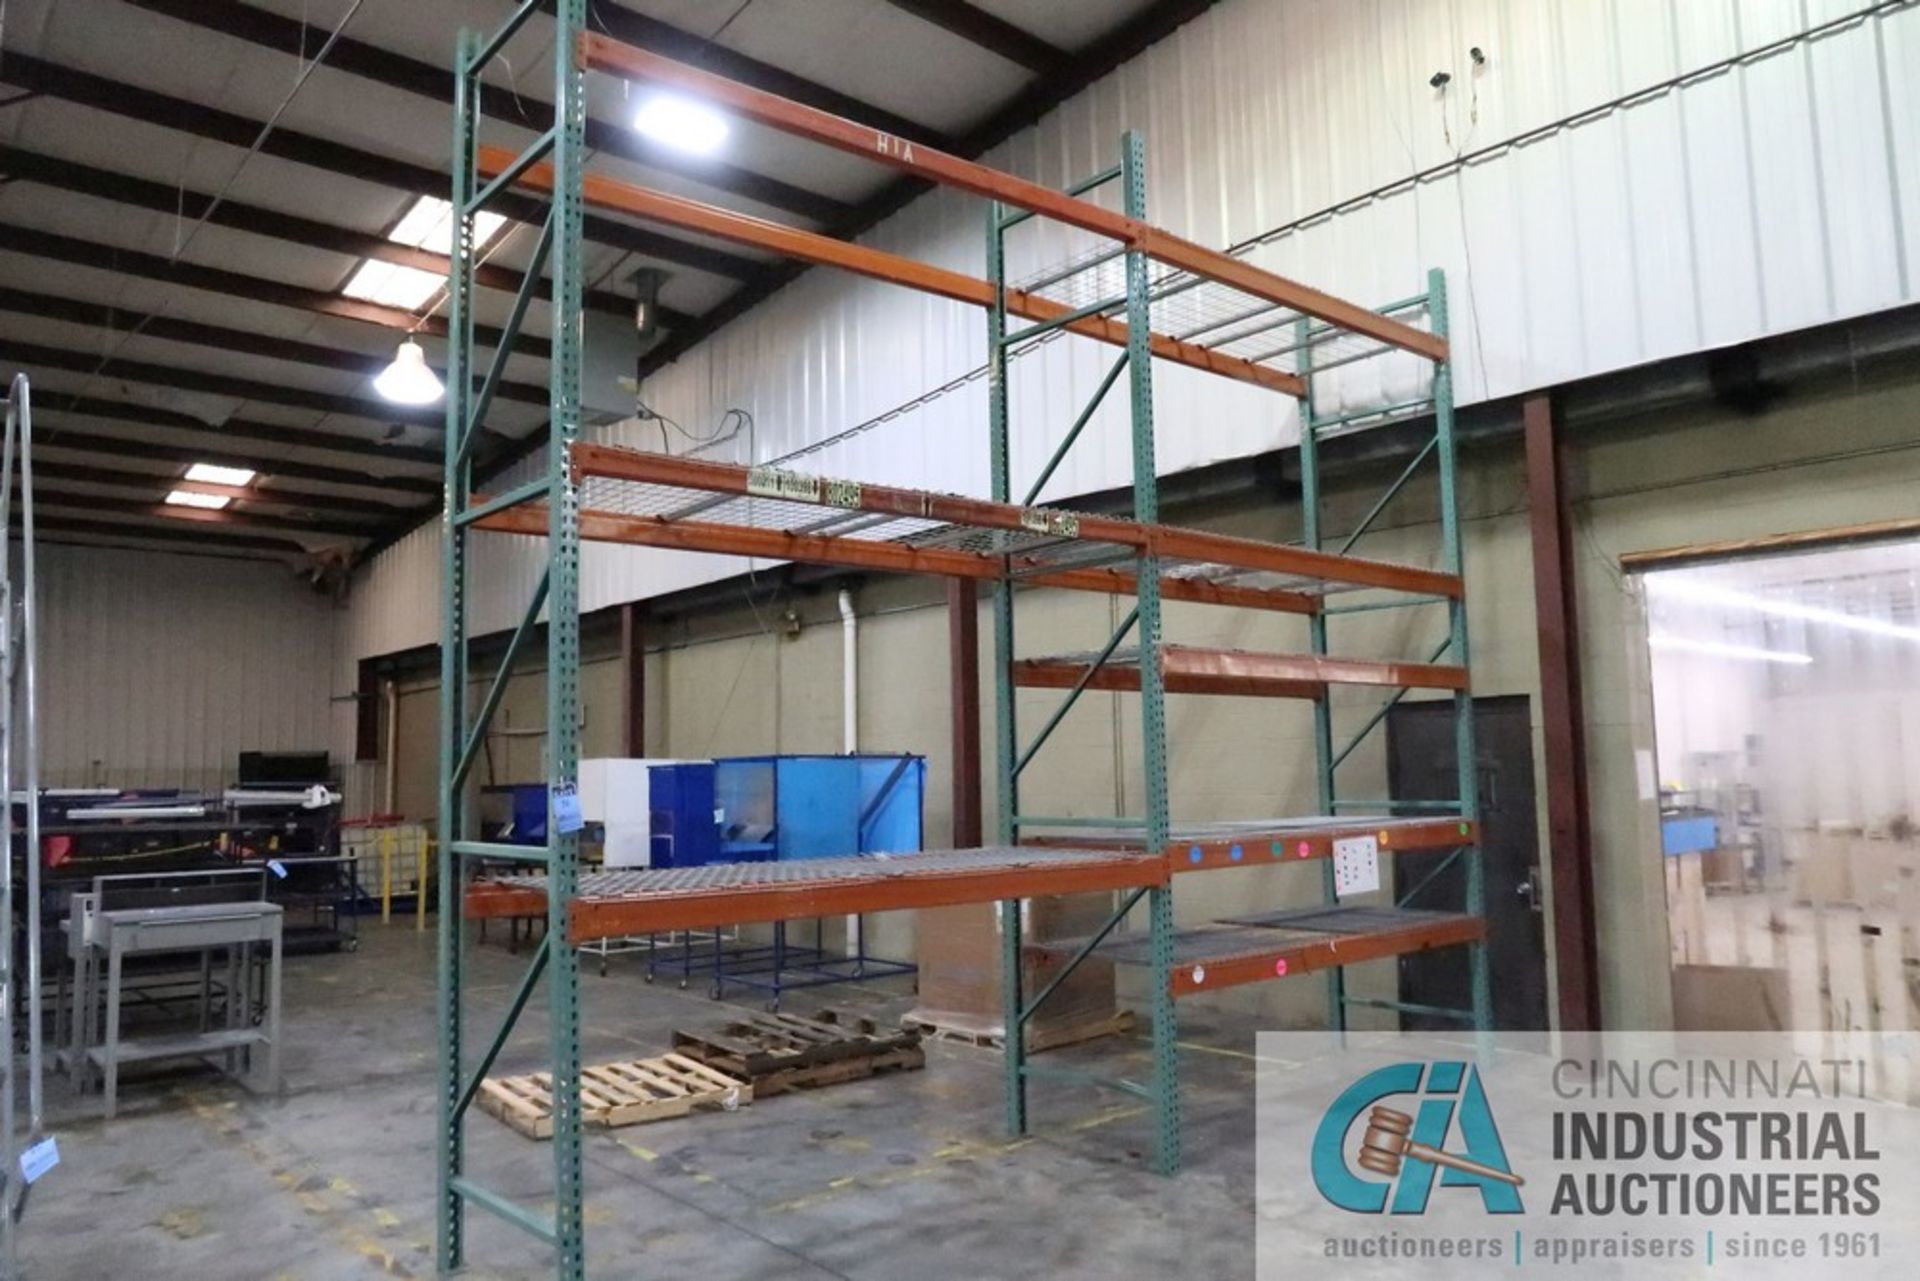 SECTIONS 108" X 42" X 192" ADJUSTABLE BEAM PALLET RACK, (3) UPRIGHTS, (16) CROSSBEAMS, (14) WIRE